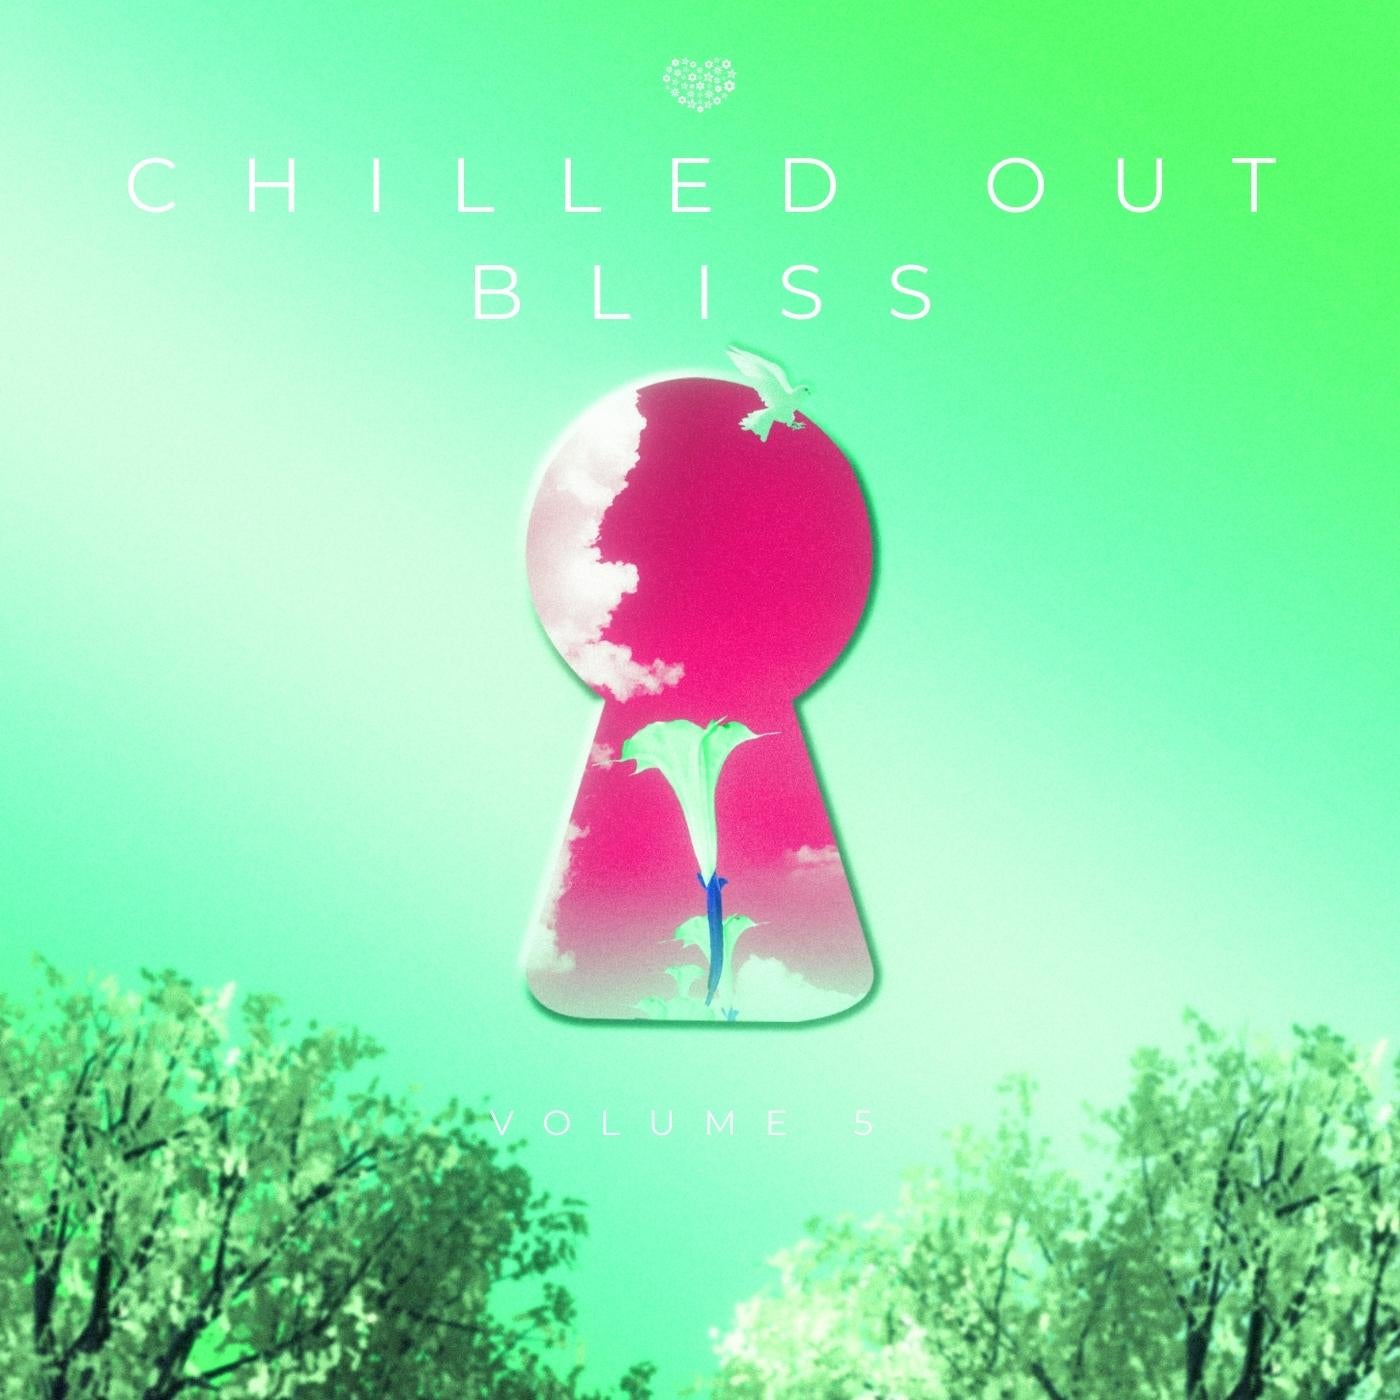 Chilled Out Bliss 005